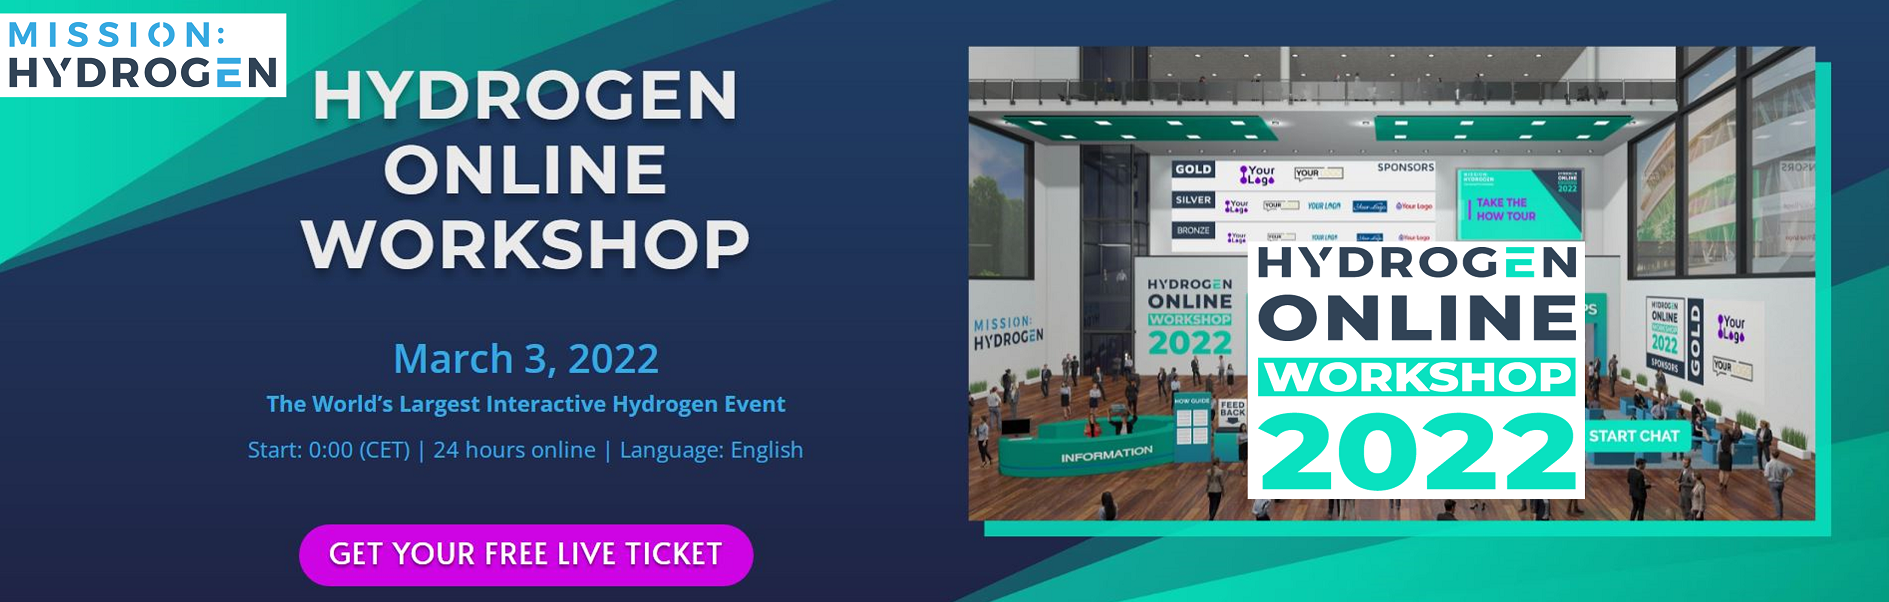 Join DAM Group at the Hydrogen Online Workshop 2022